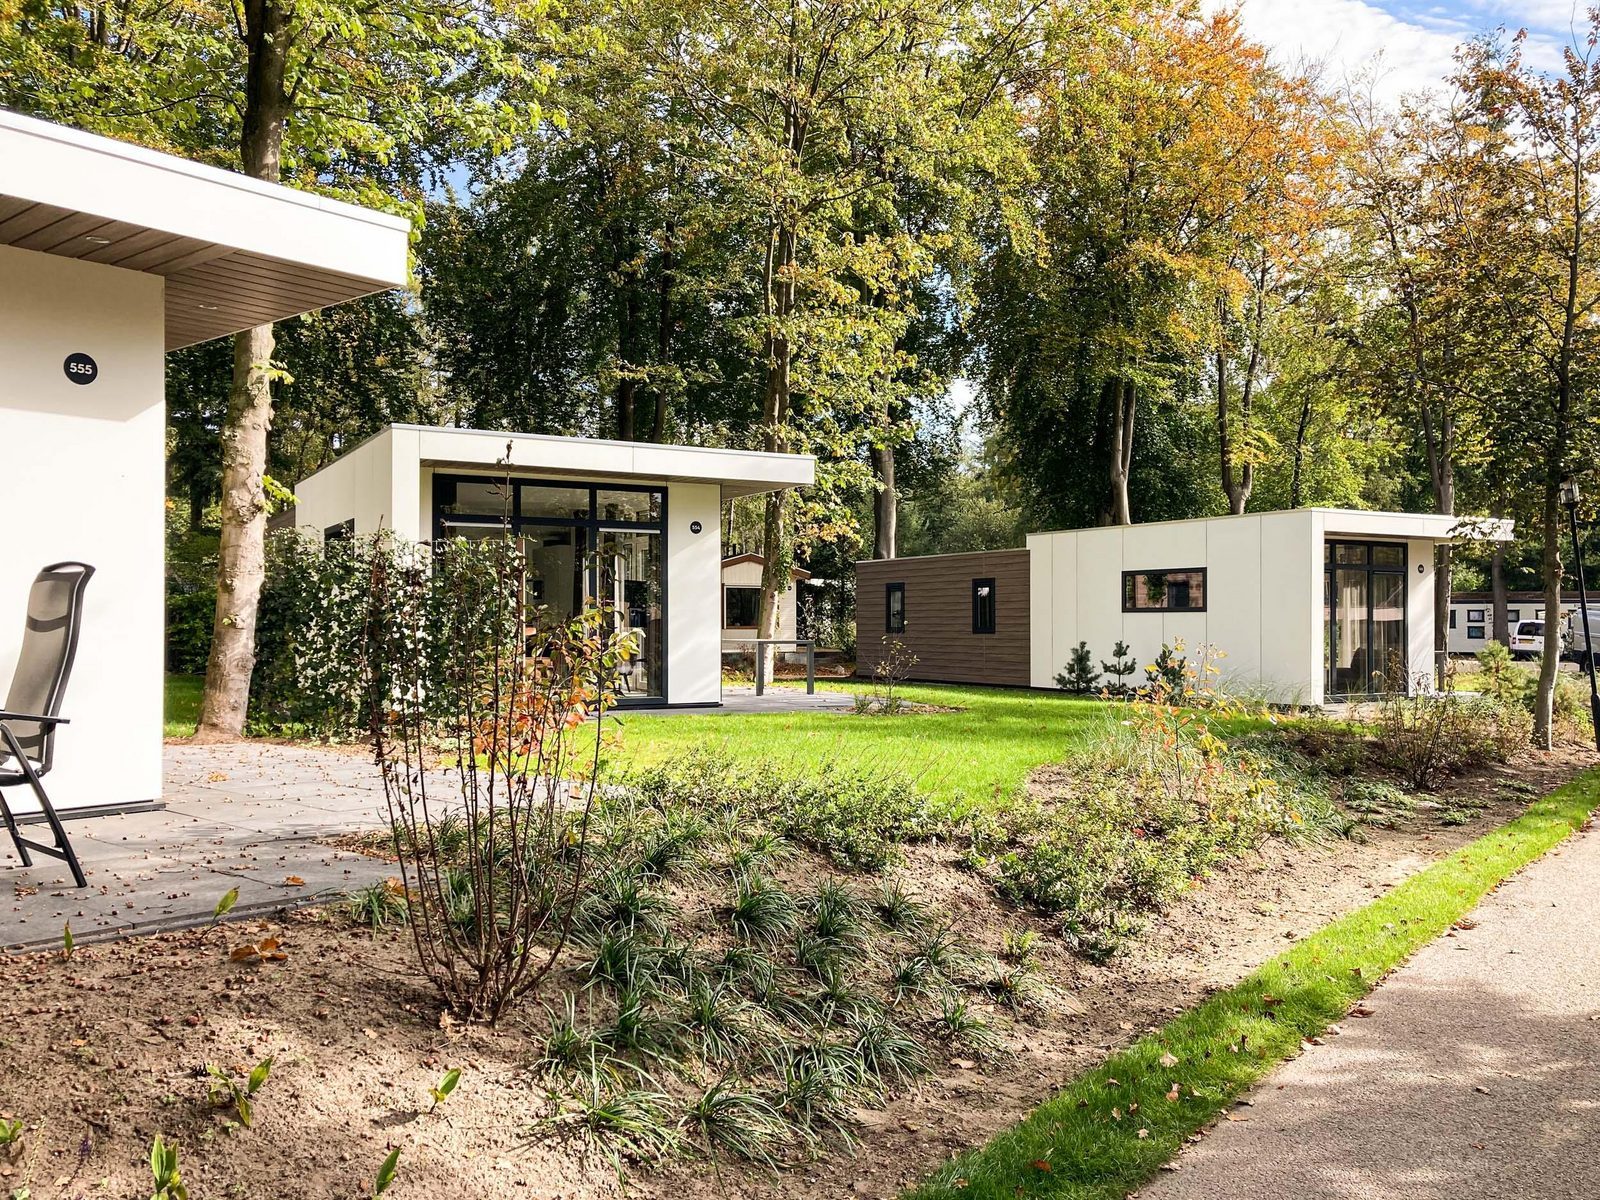 Buying a bungalow The Netherlands